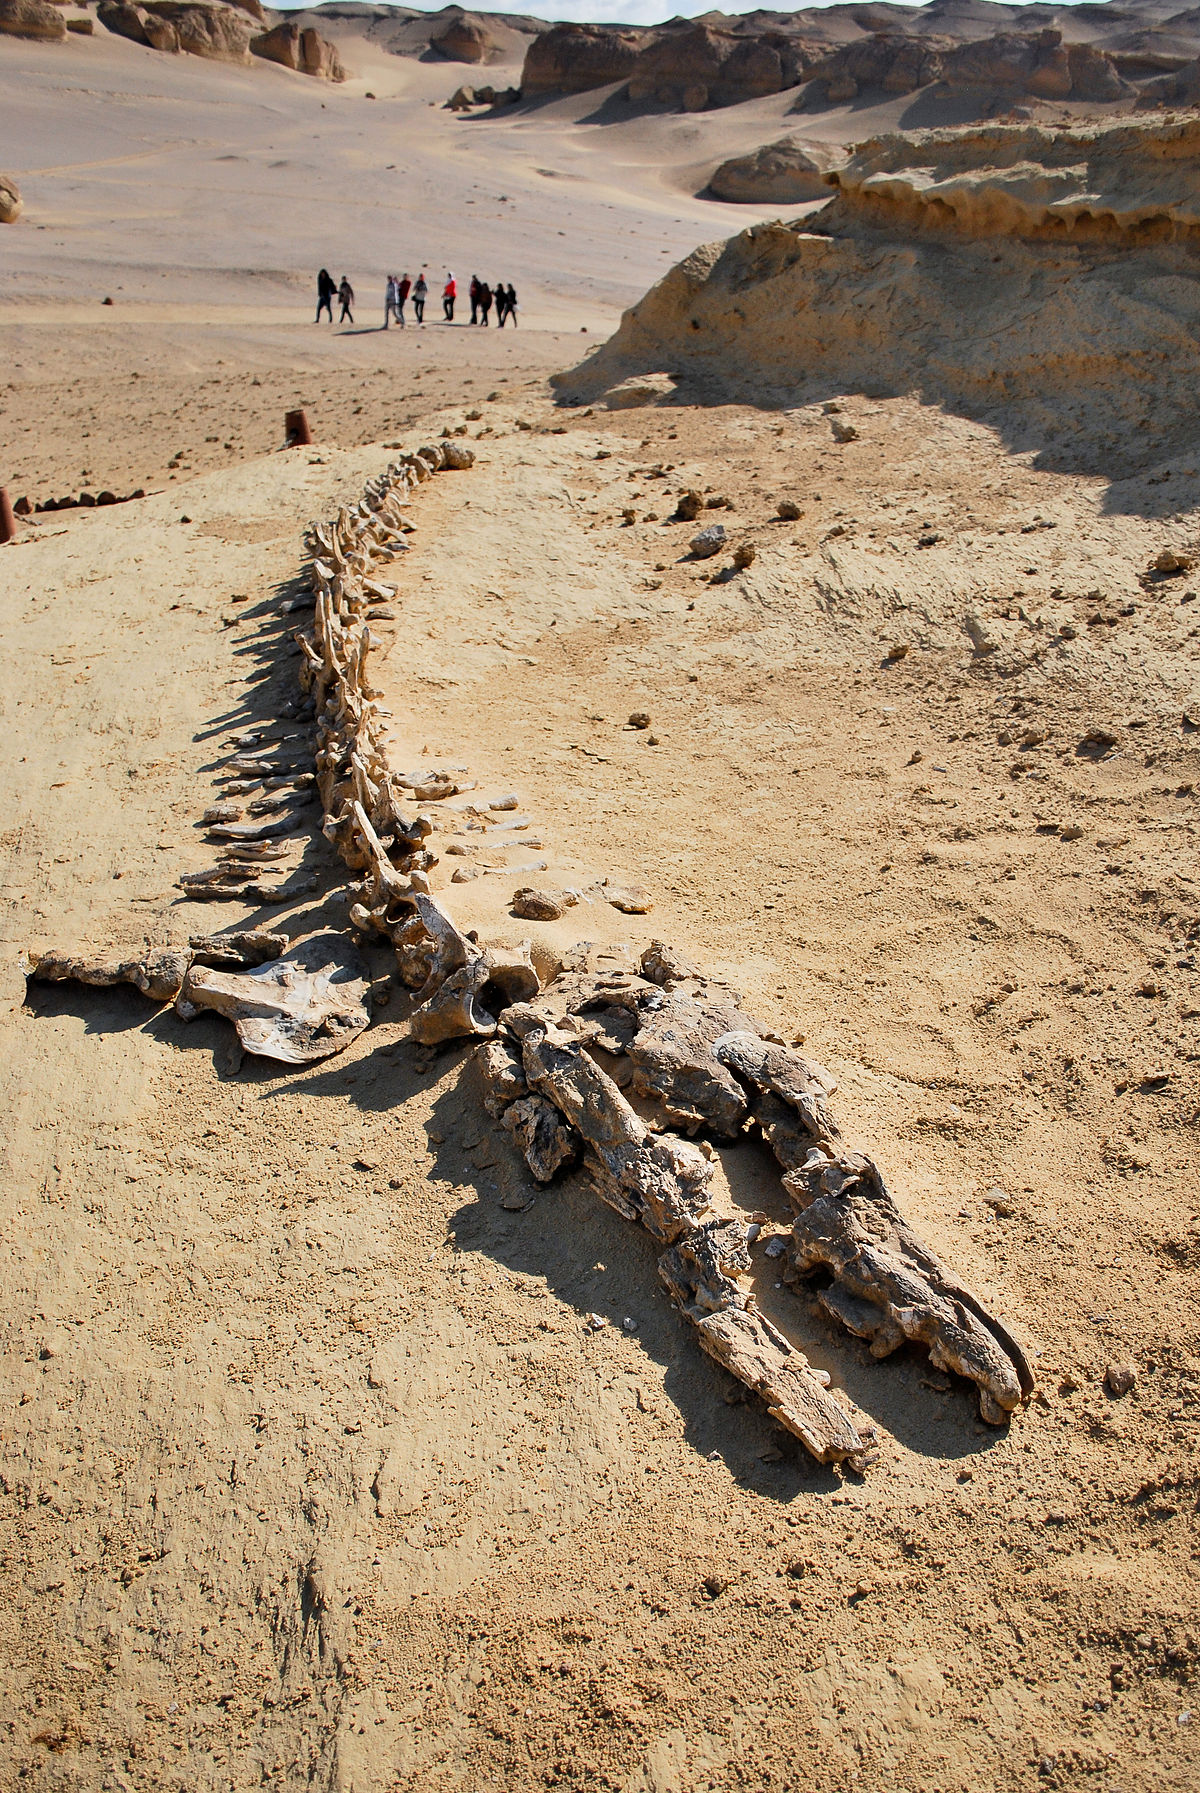 Giant whale skeleton lying on the sand